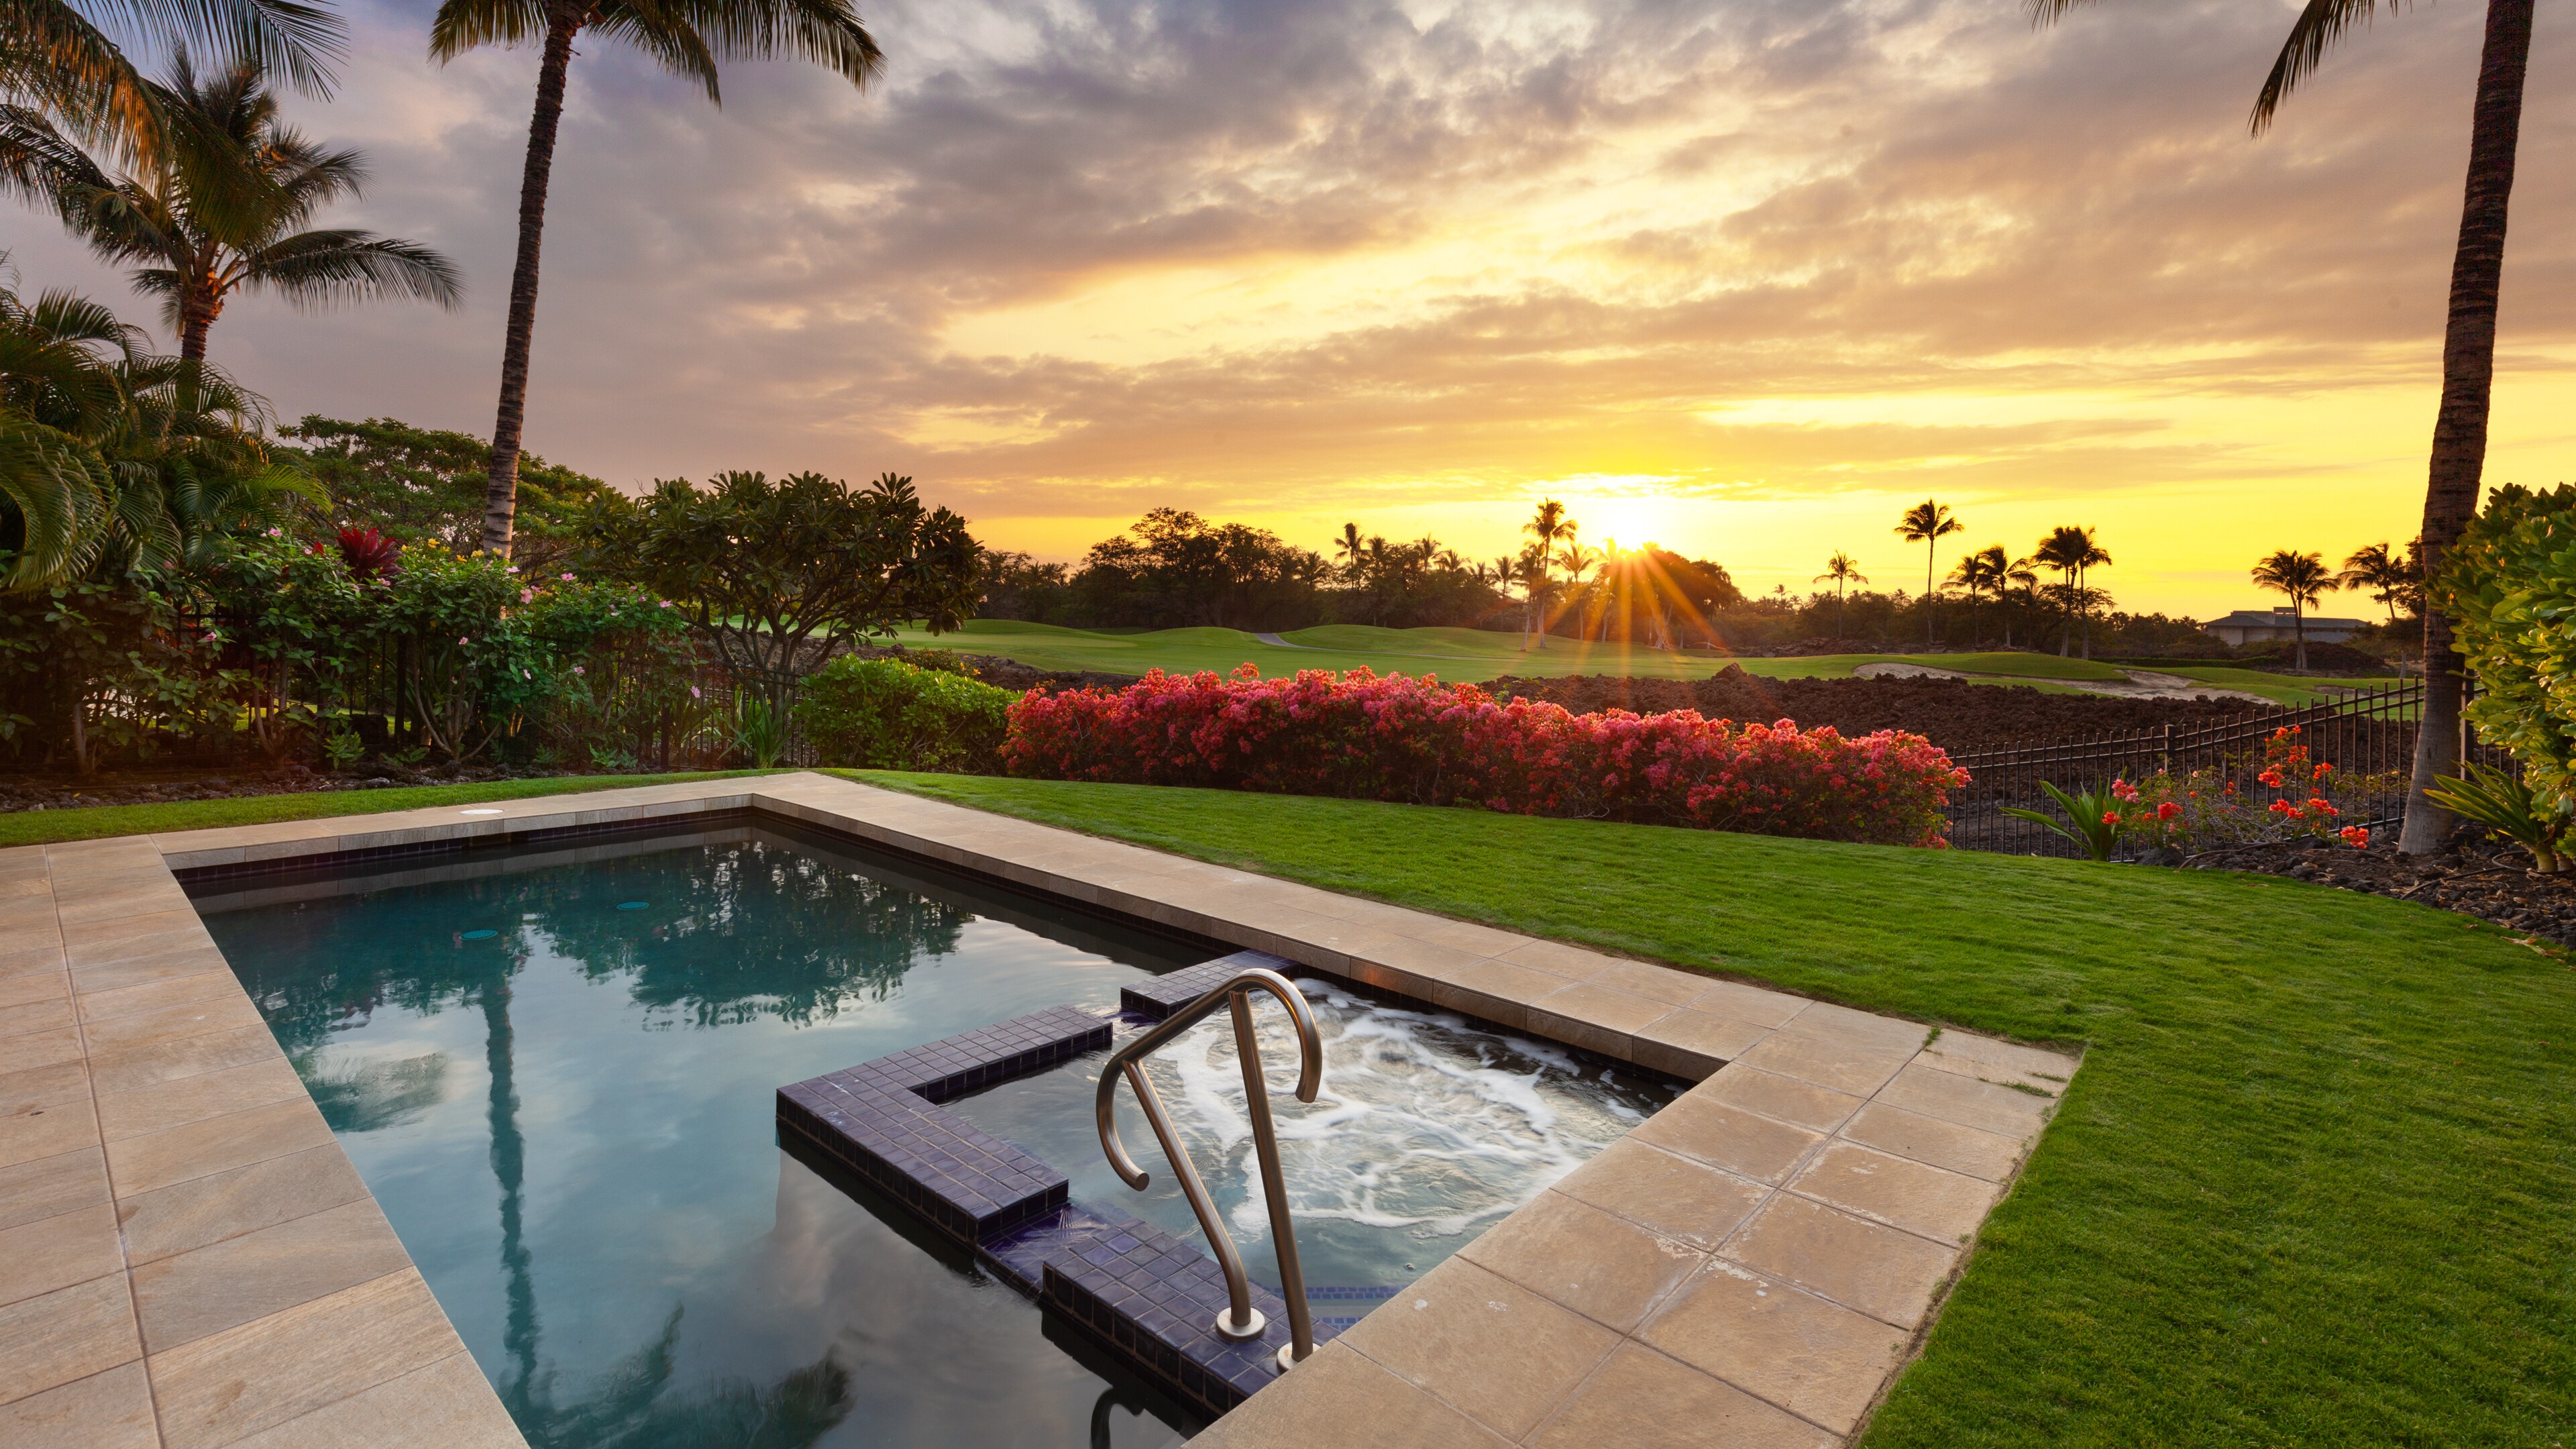 Enjoy amazing golf and sunset view from the private pool and spa in the backyard